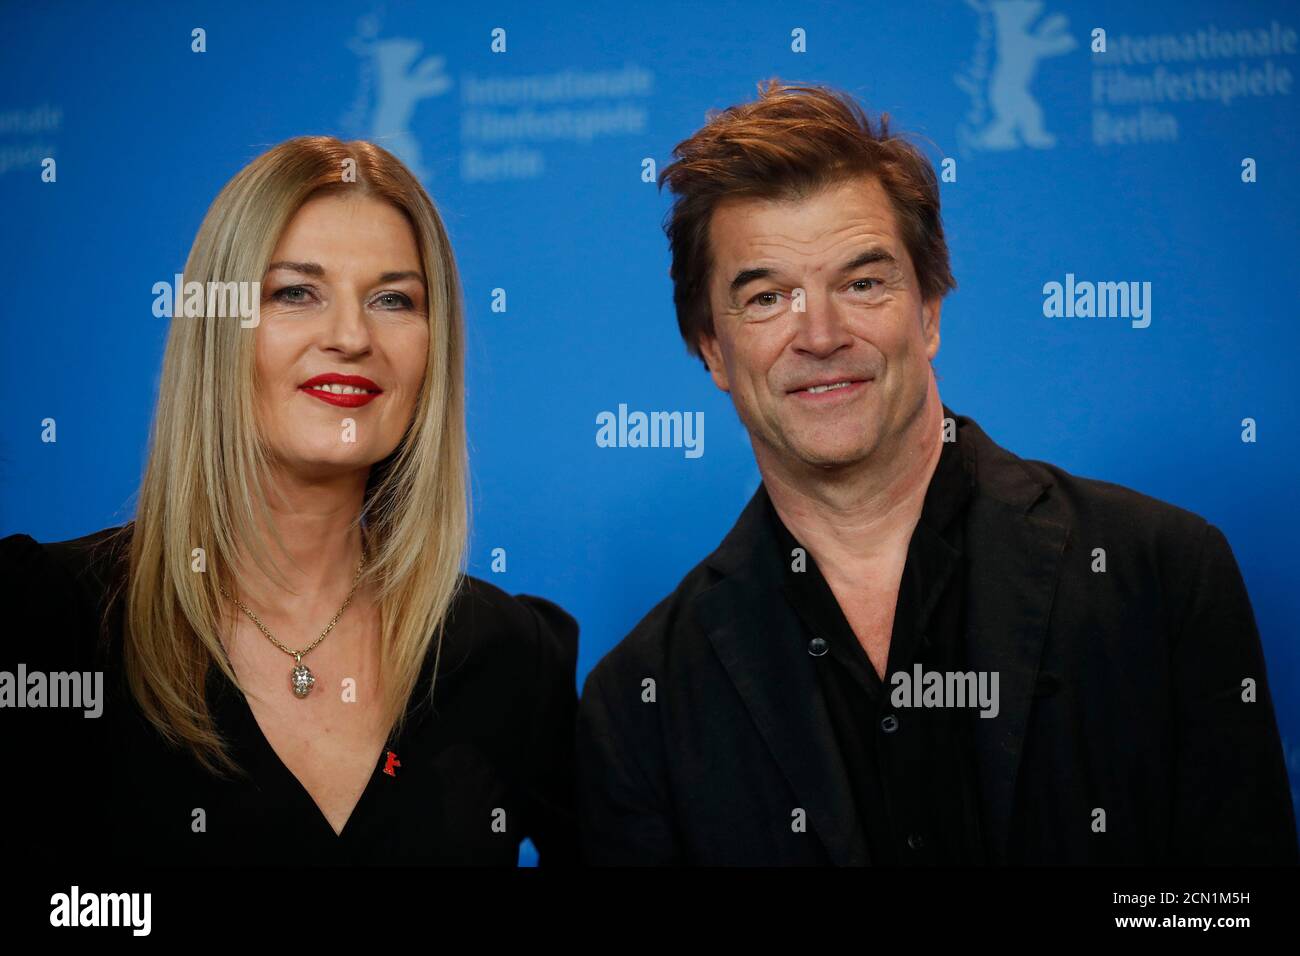 Directors and screenwriters Cordula Kablitz-Post and Campino pose during a  photocall to promote the movie "Weil du nur einmal lebst - Die Toten Hosen  auf Tour " (You Only Live Once -